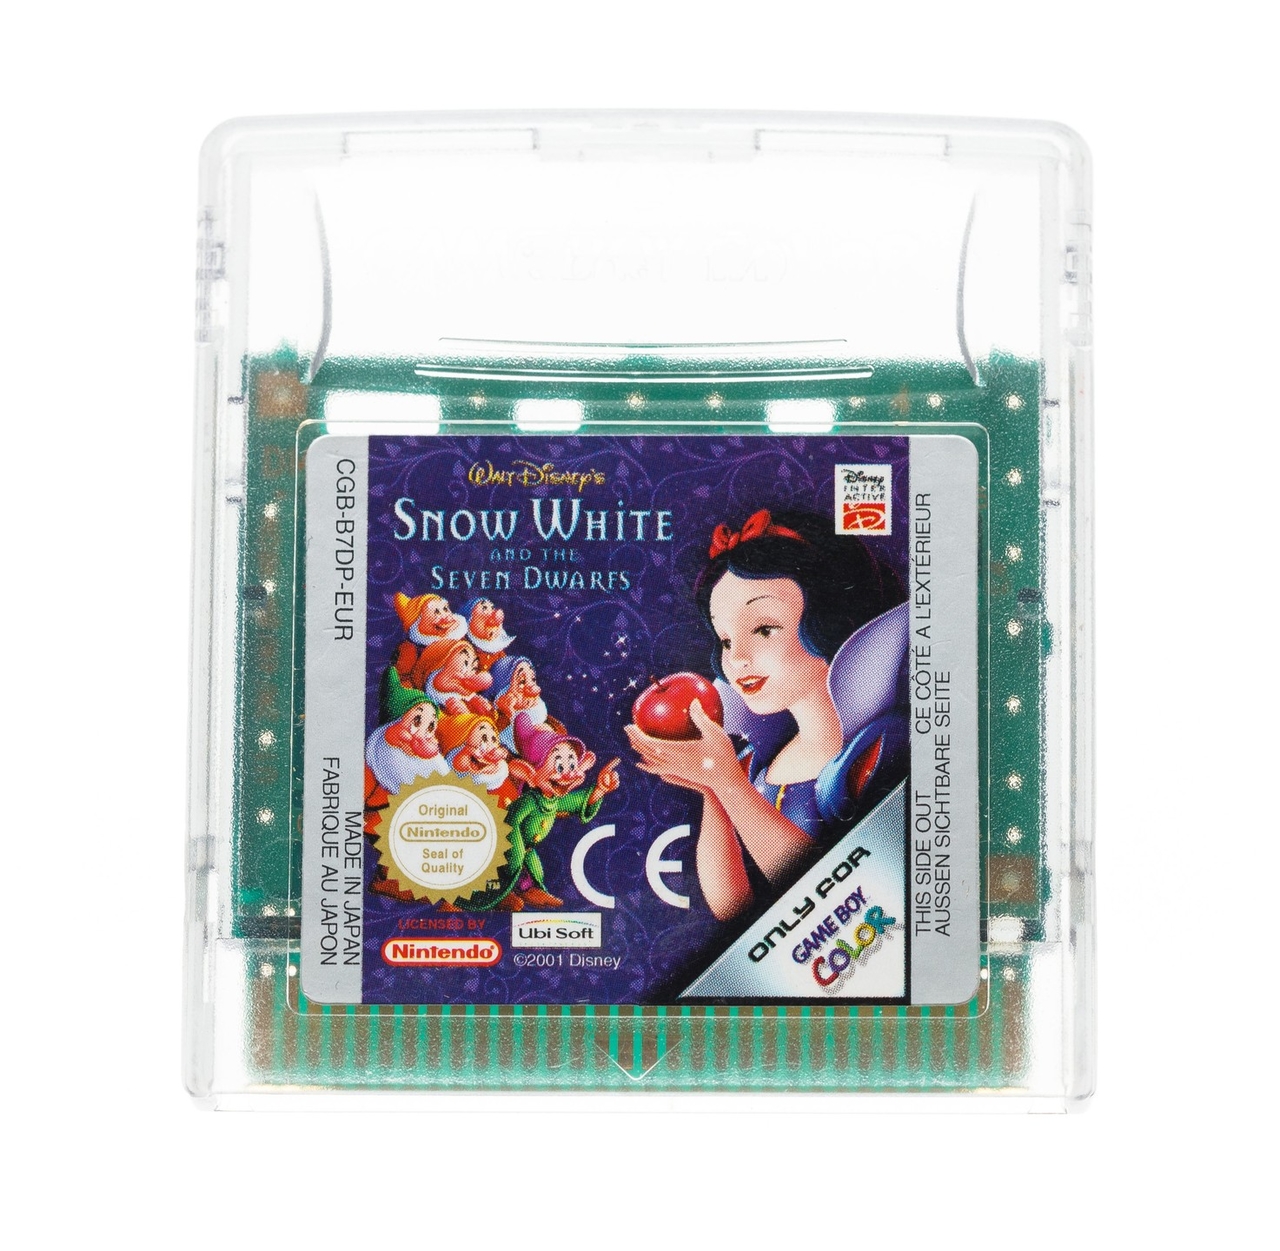 Snow White and the Seven Dwarfs Kopen | Gameboy Color Games